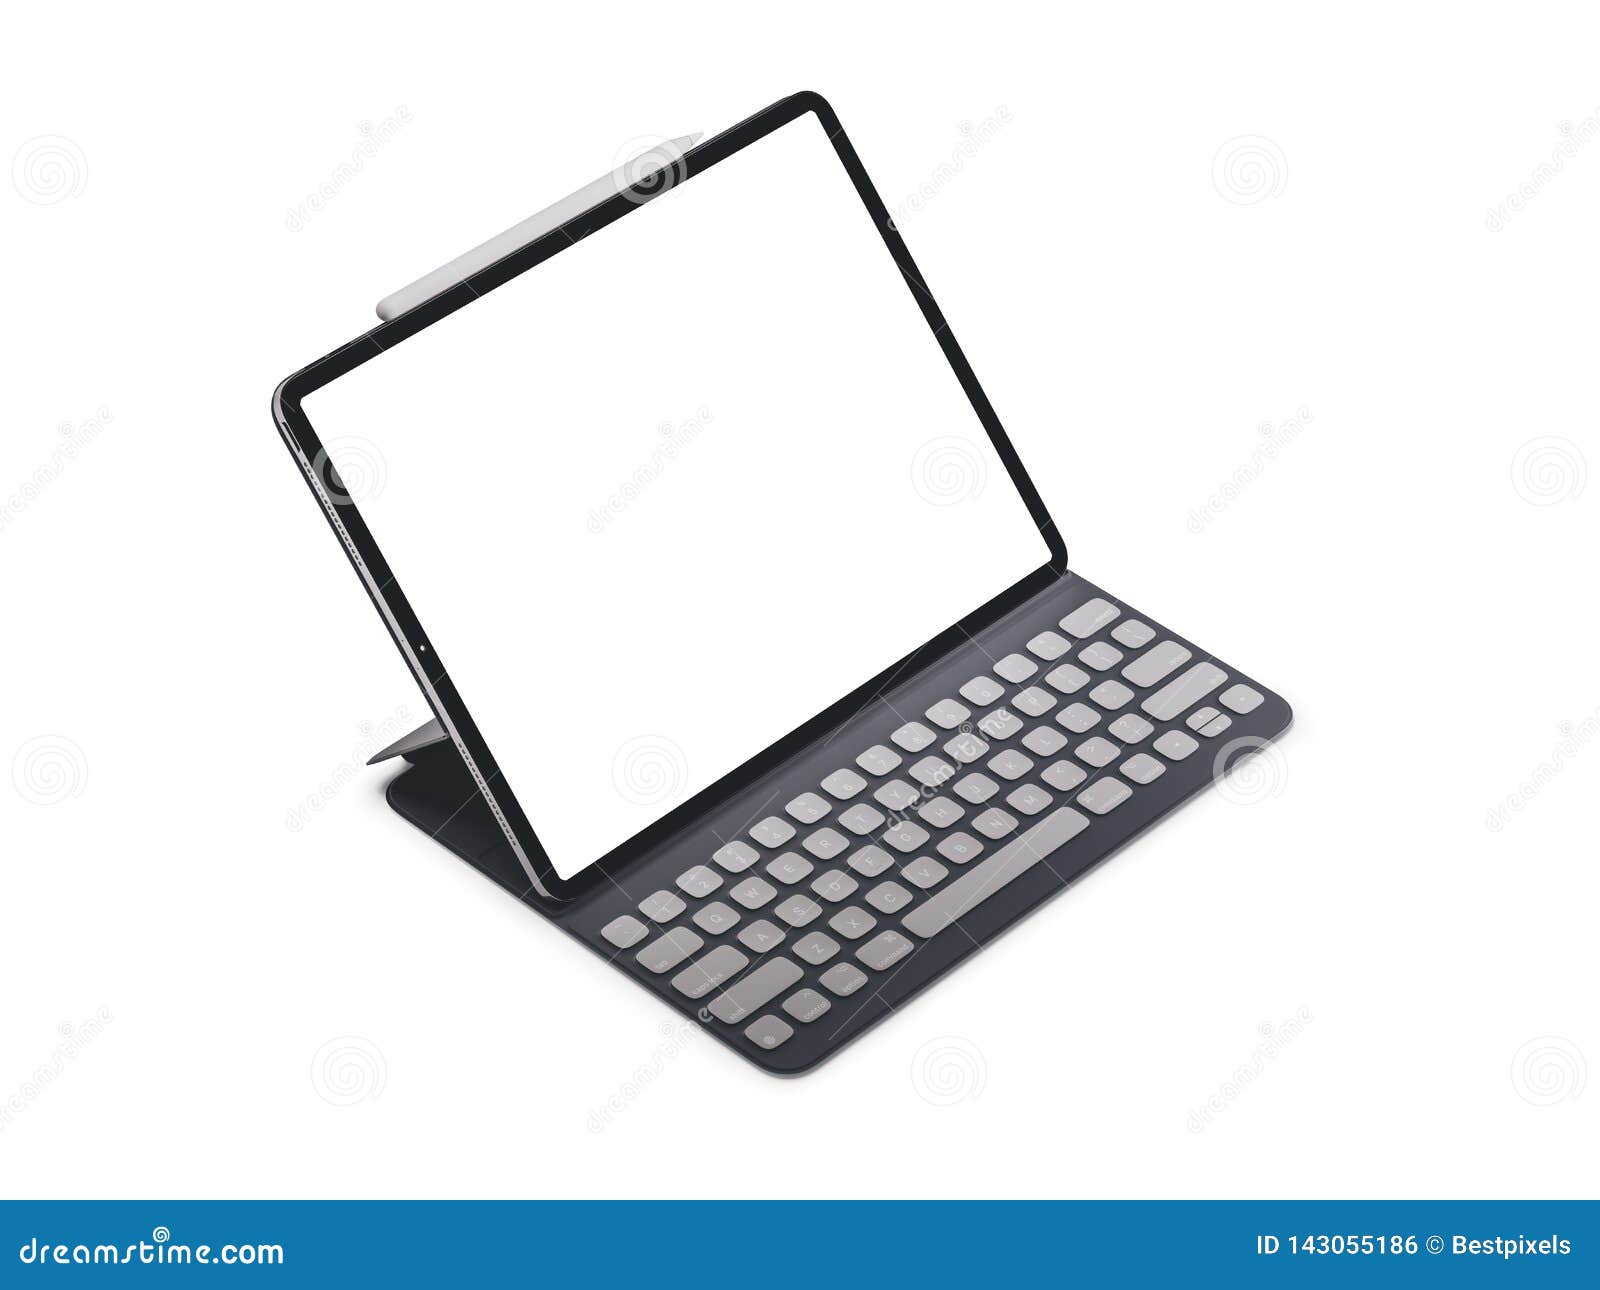 blank screen tablet on white background.  ipad.